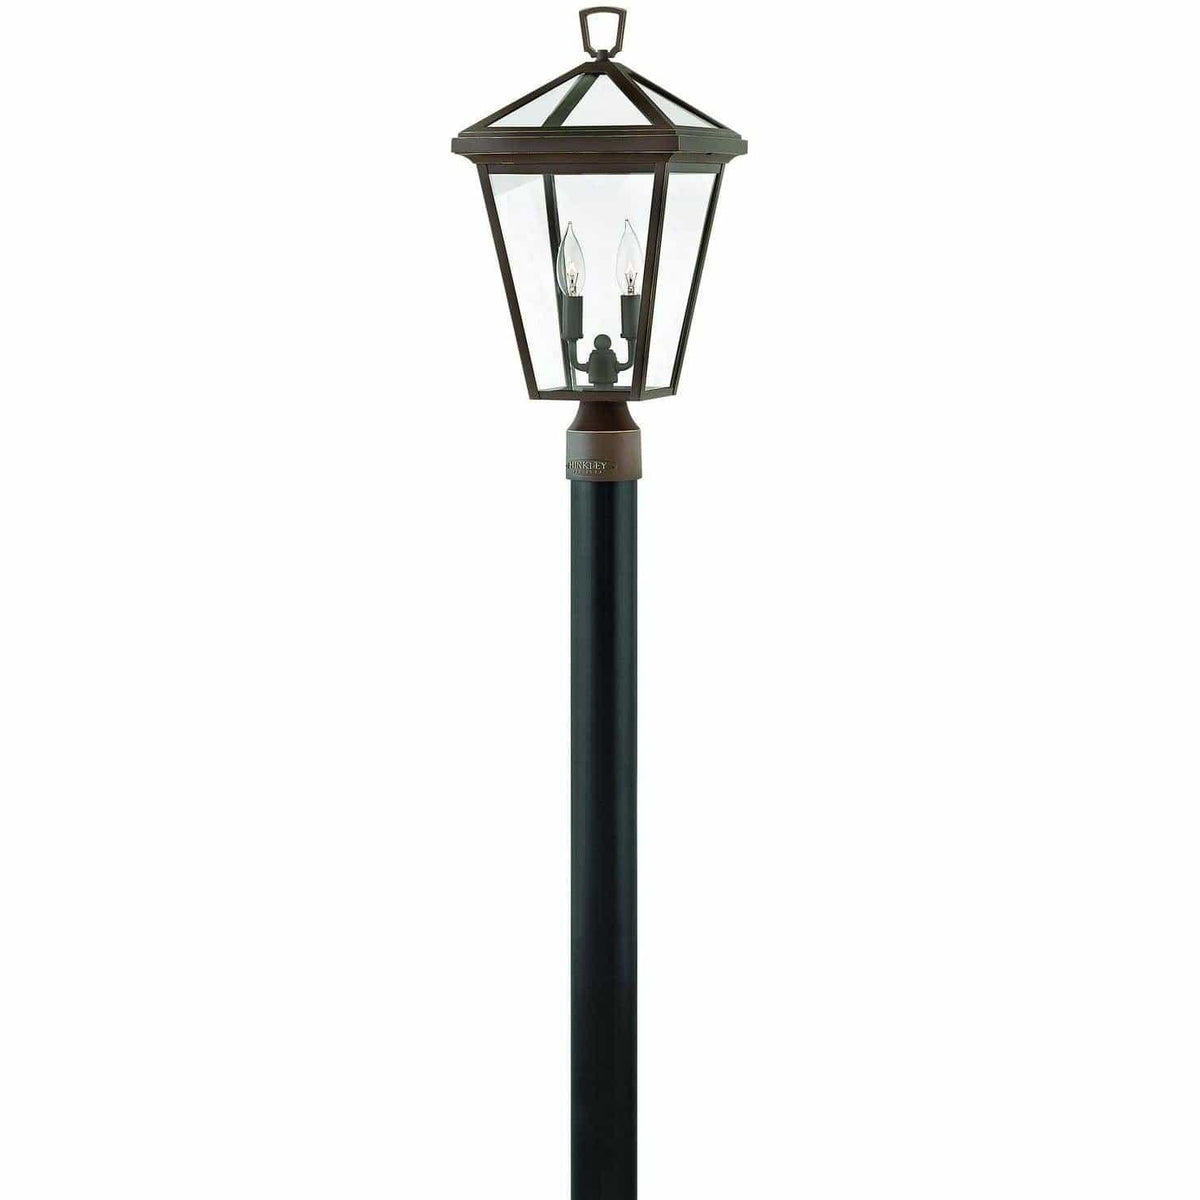 Hinkley Lighting - Alford Place 21-Inch Outdoor Post Mount - 2561OZ | Montreal Lighting & Hardware